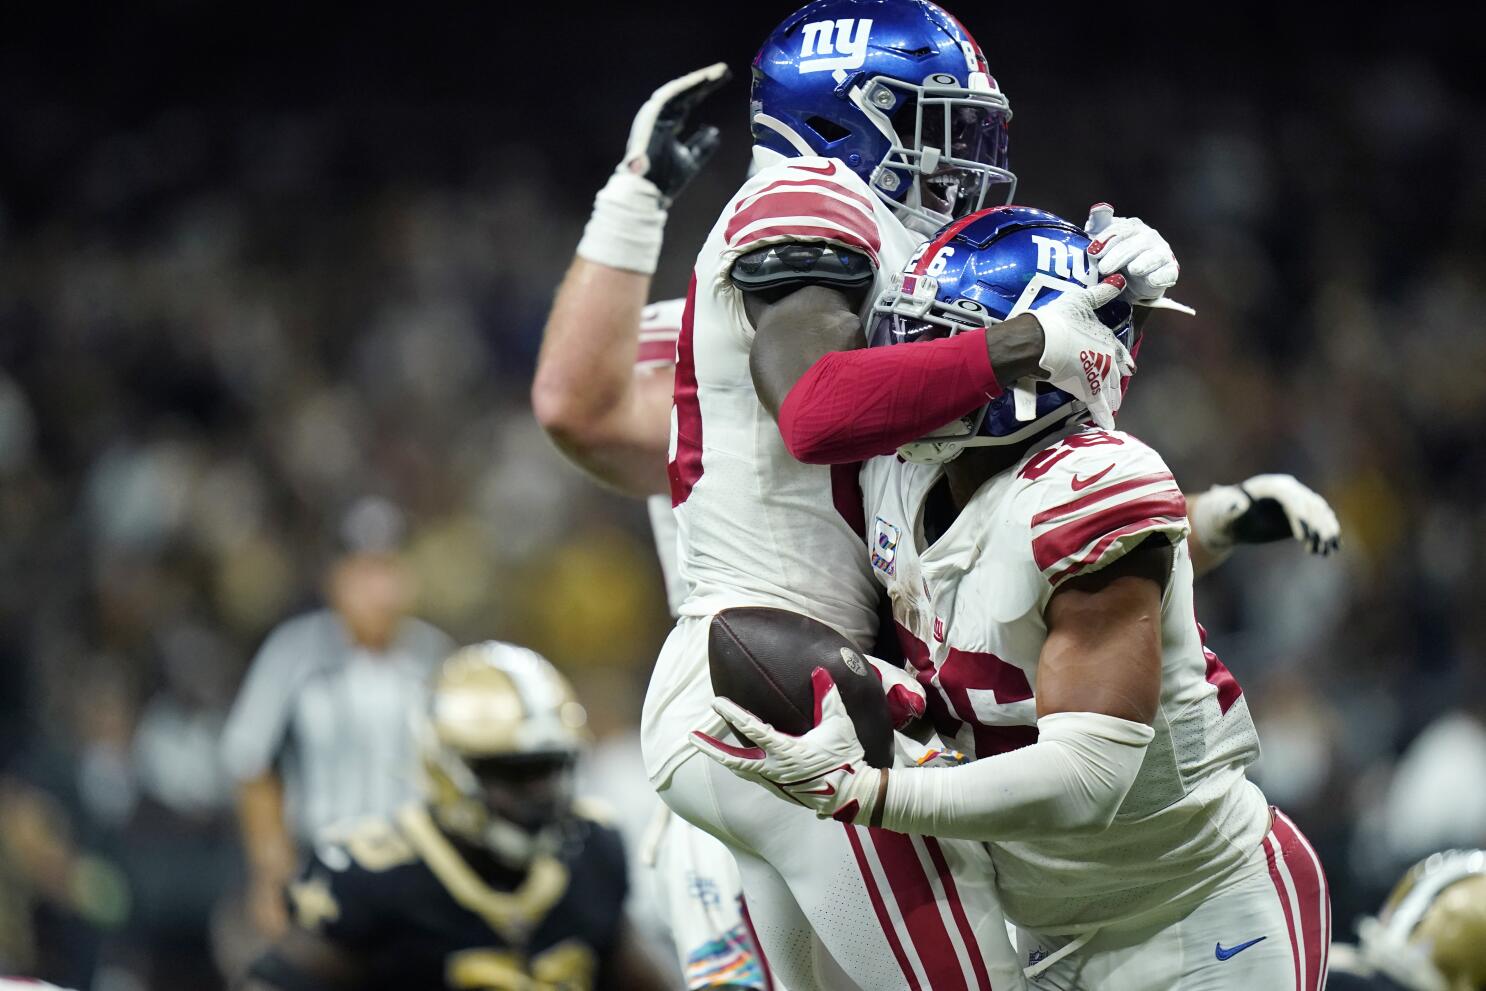 Receiver Kadarius Toney creating exicitement for N.Y. Giants - The